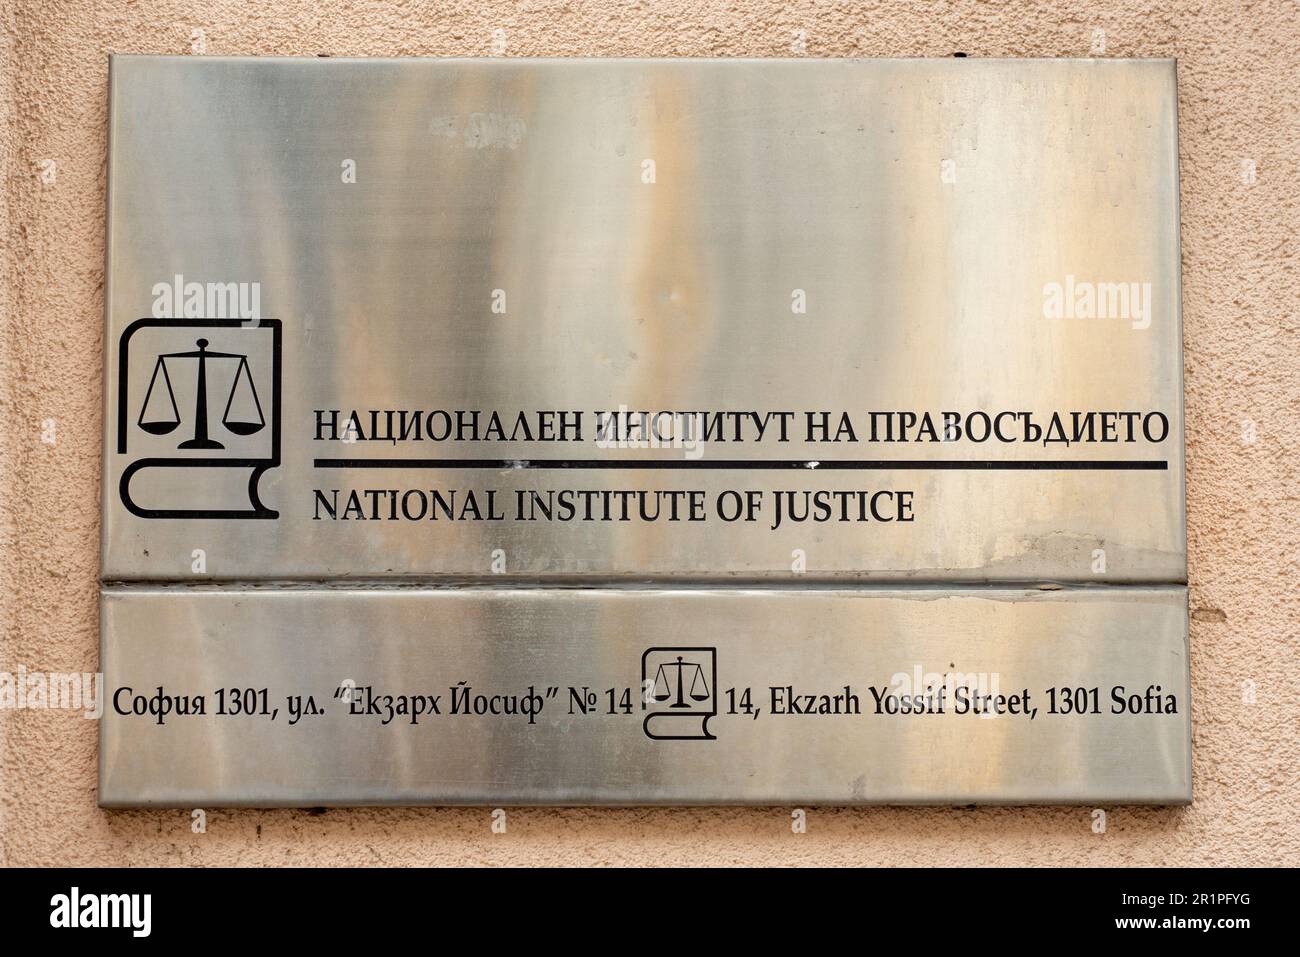 National Institute of Justice address sign in Bulgarian and English for the Government Institution in Sofia, Bulgaria, Eastern Europe, Balkans, EU Stock Photo